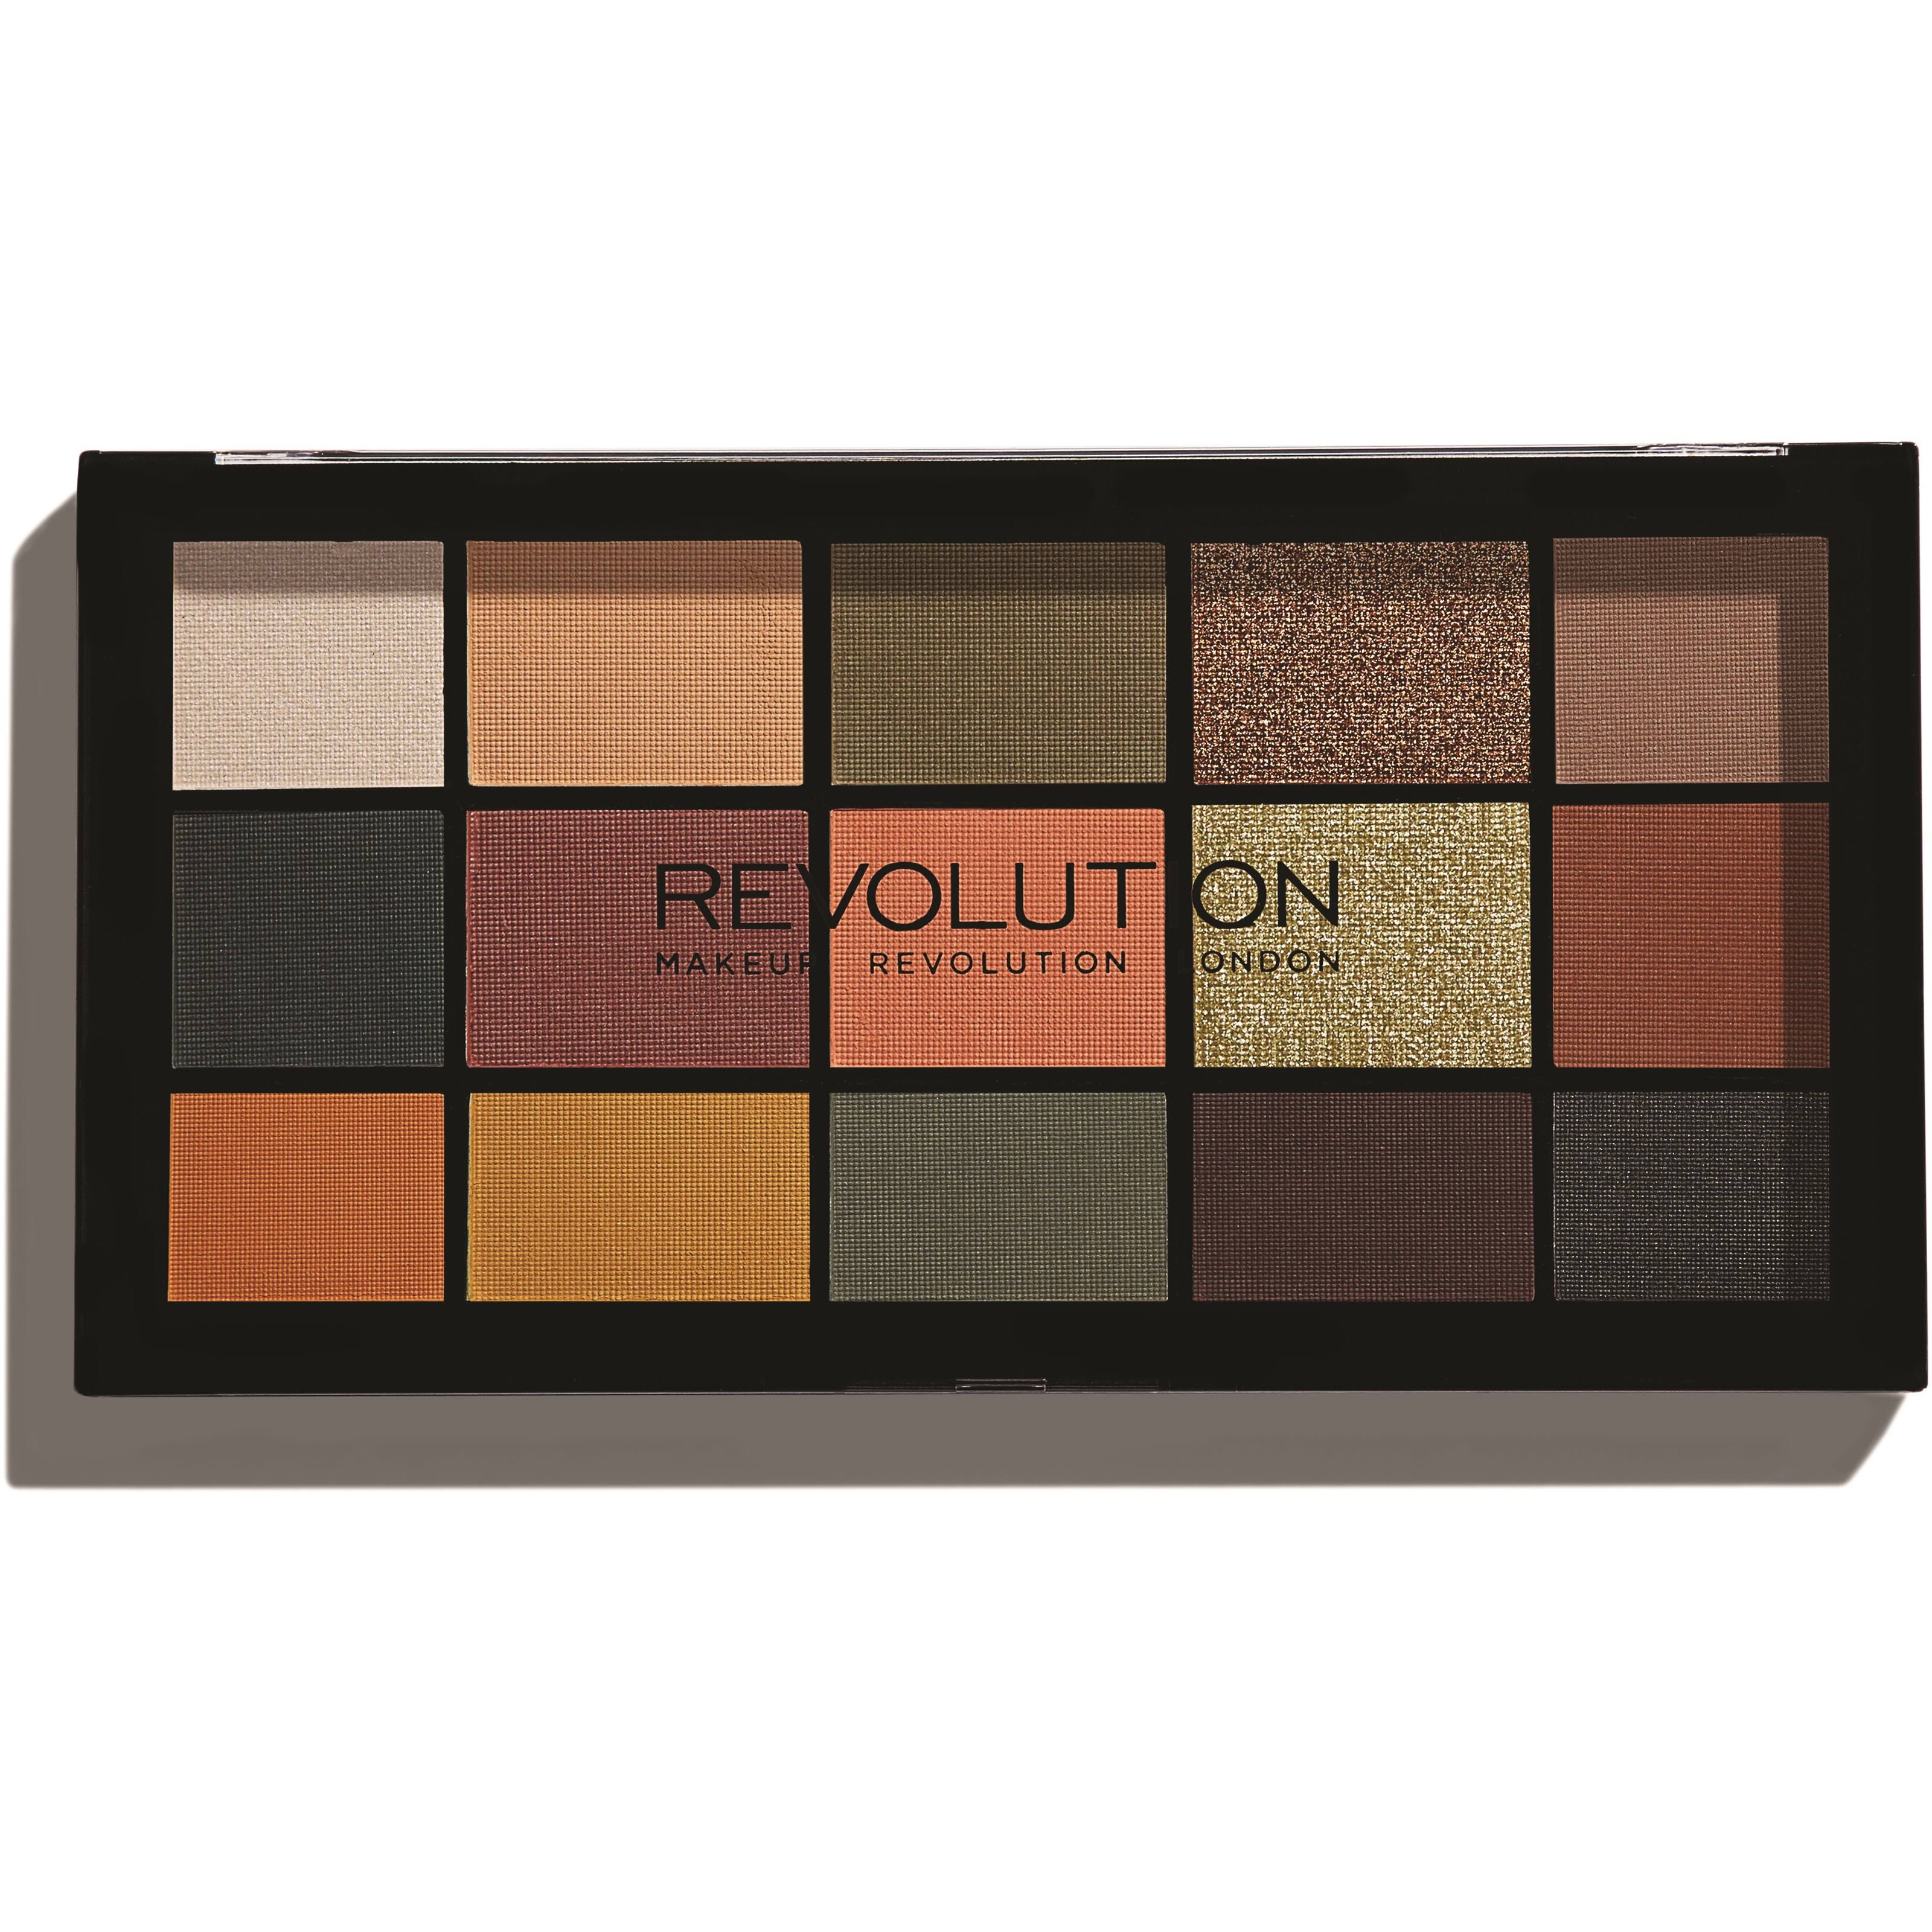 Makeup Revolution Reloaded Iconic Division Eyeshadow Palette 16.5g